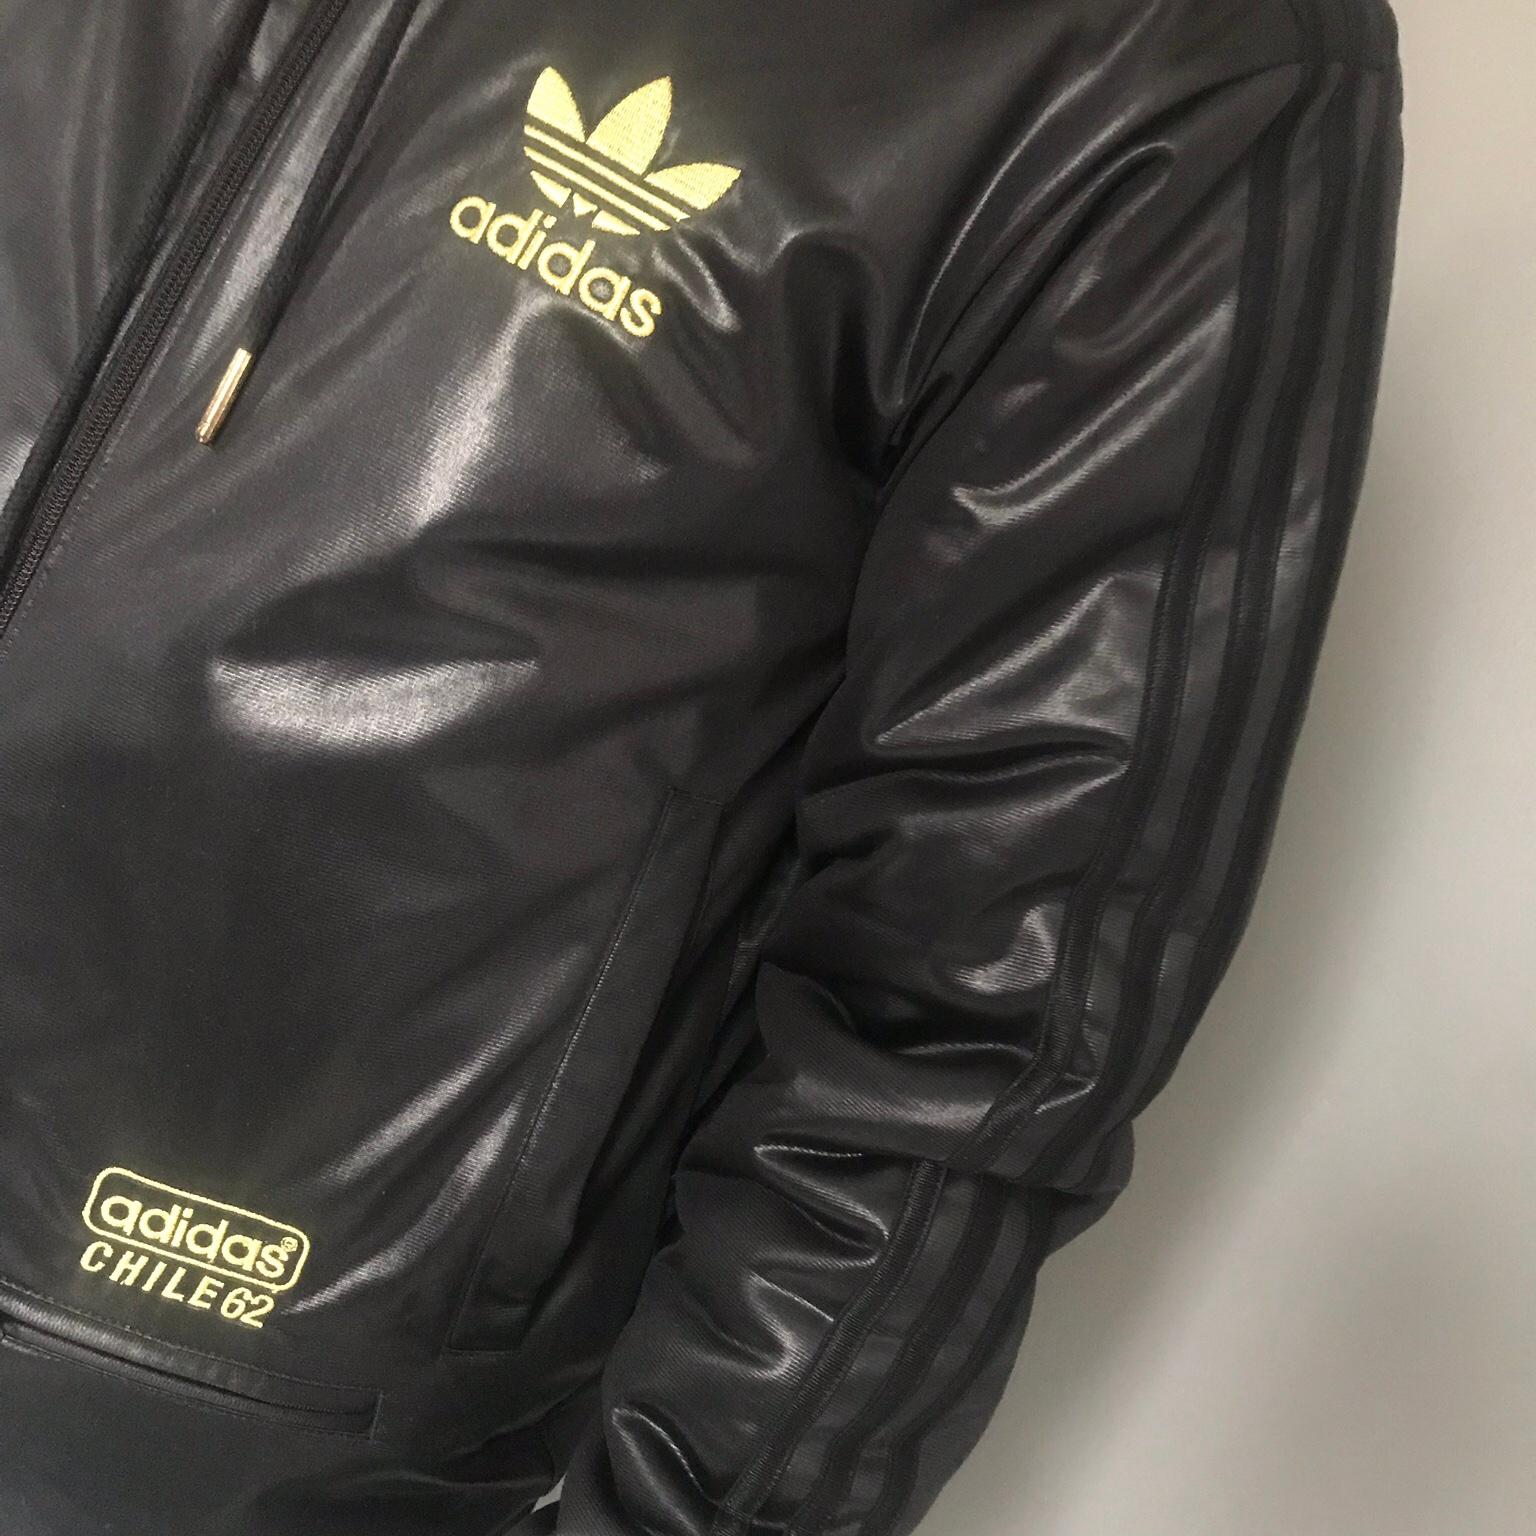 Adidas Chile 62 reversible jacket in M23 Manchester for £50.00 for sale |  Shpock